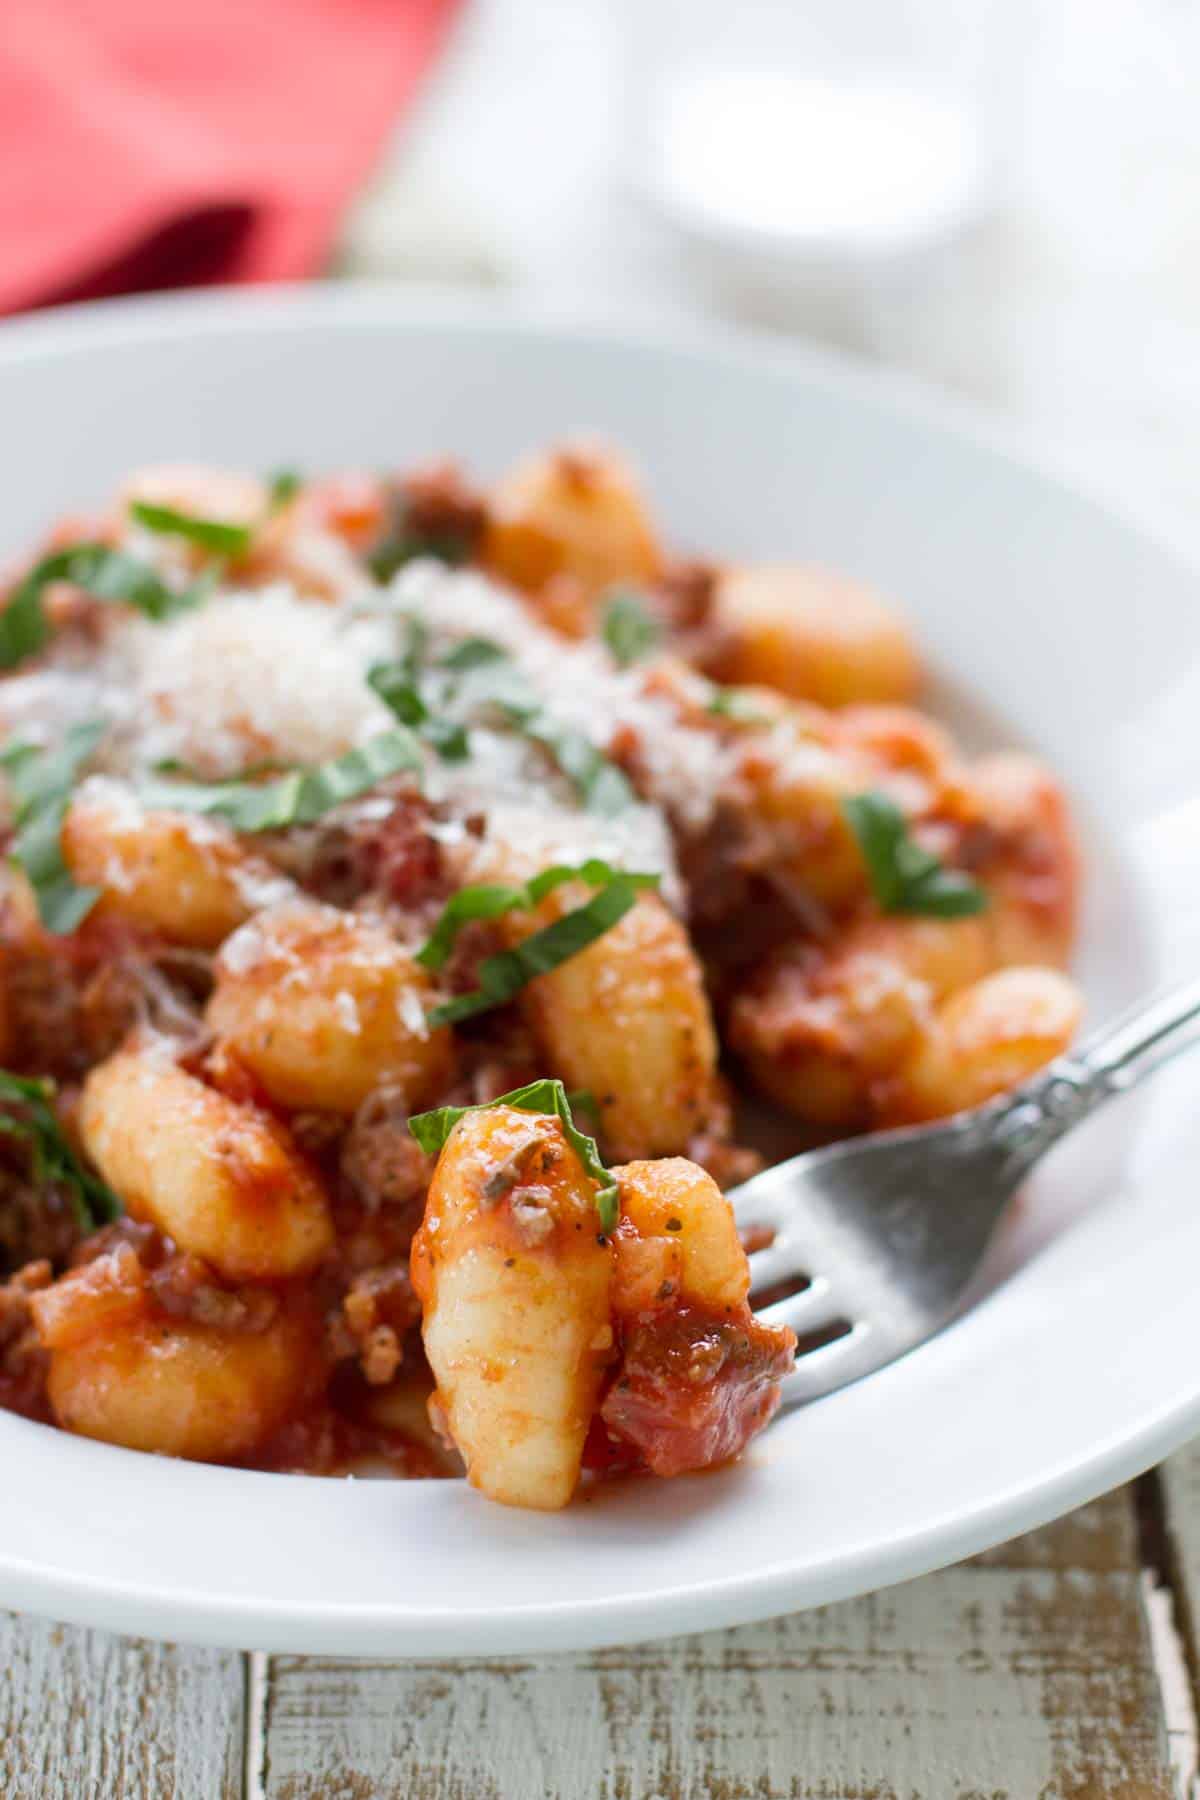 Bowl filled with gnocchi with meat sauce with a gnocchi on a fork.